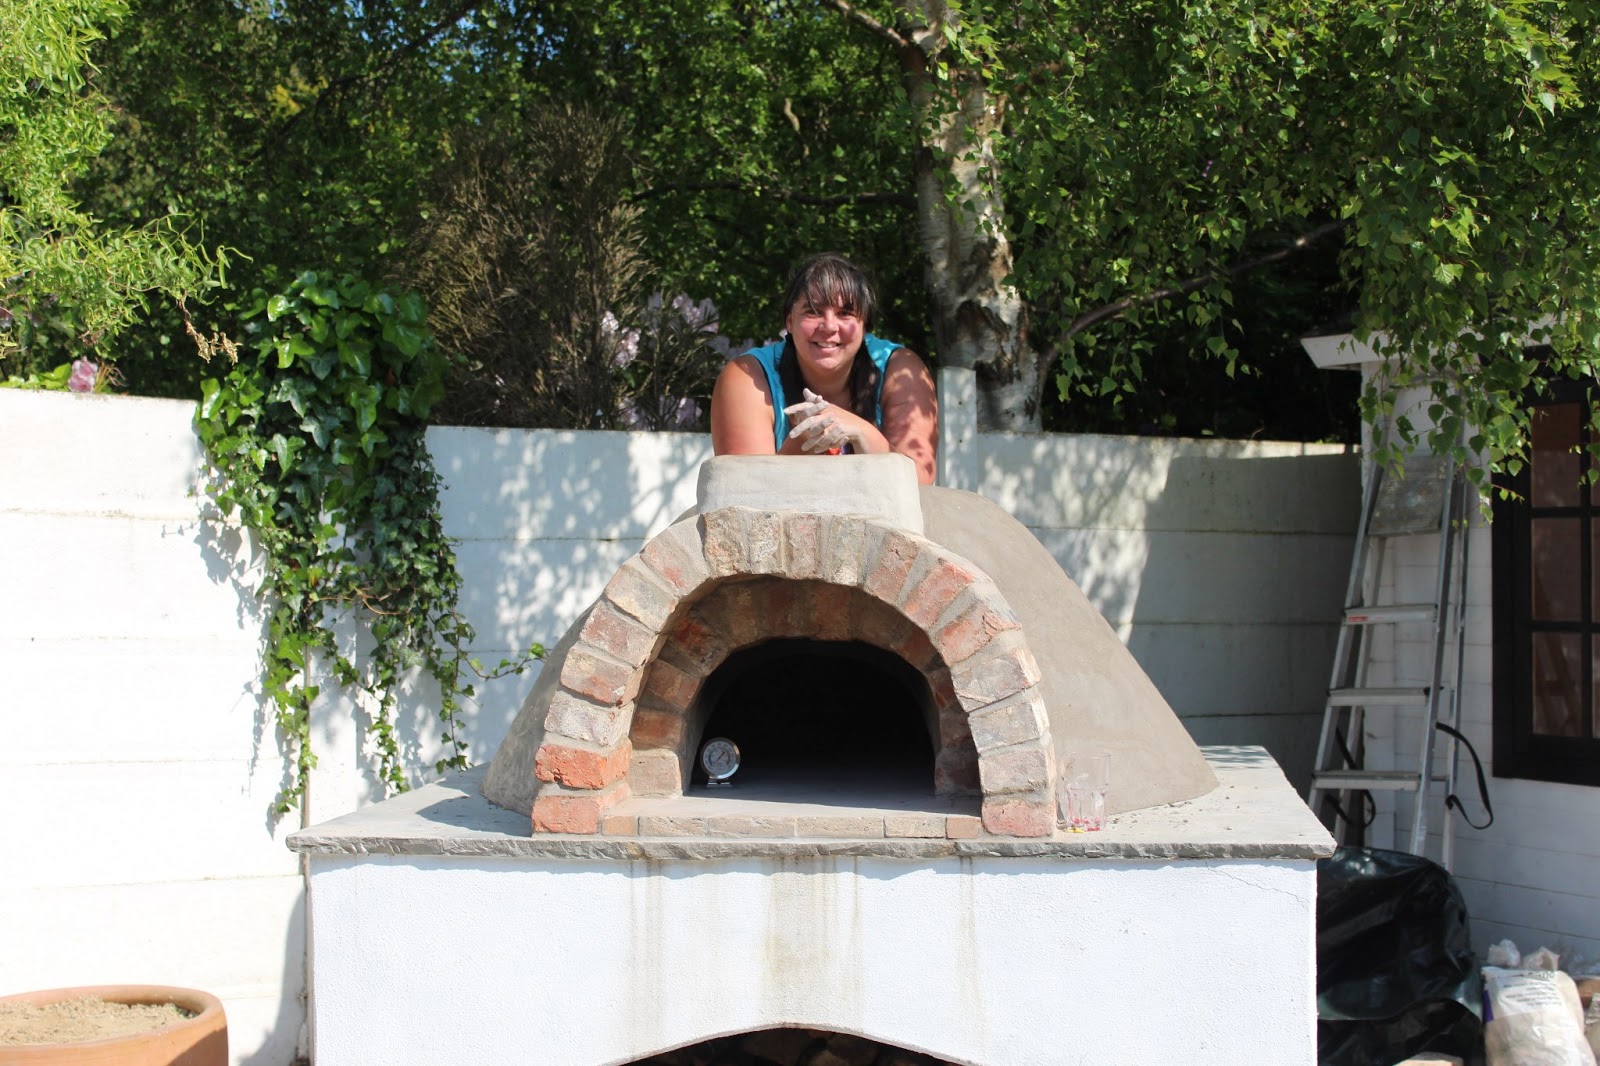 FLOWER POT KITCHEN: CLAY OVEN BUILDING YOUR WOOD FIRED PIZZA OVEN